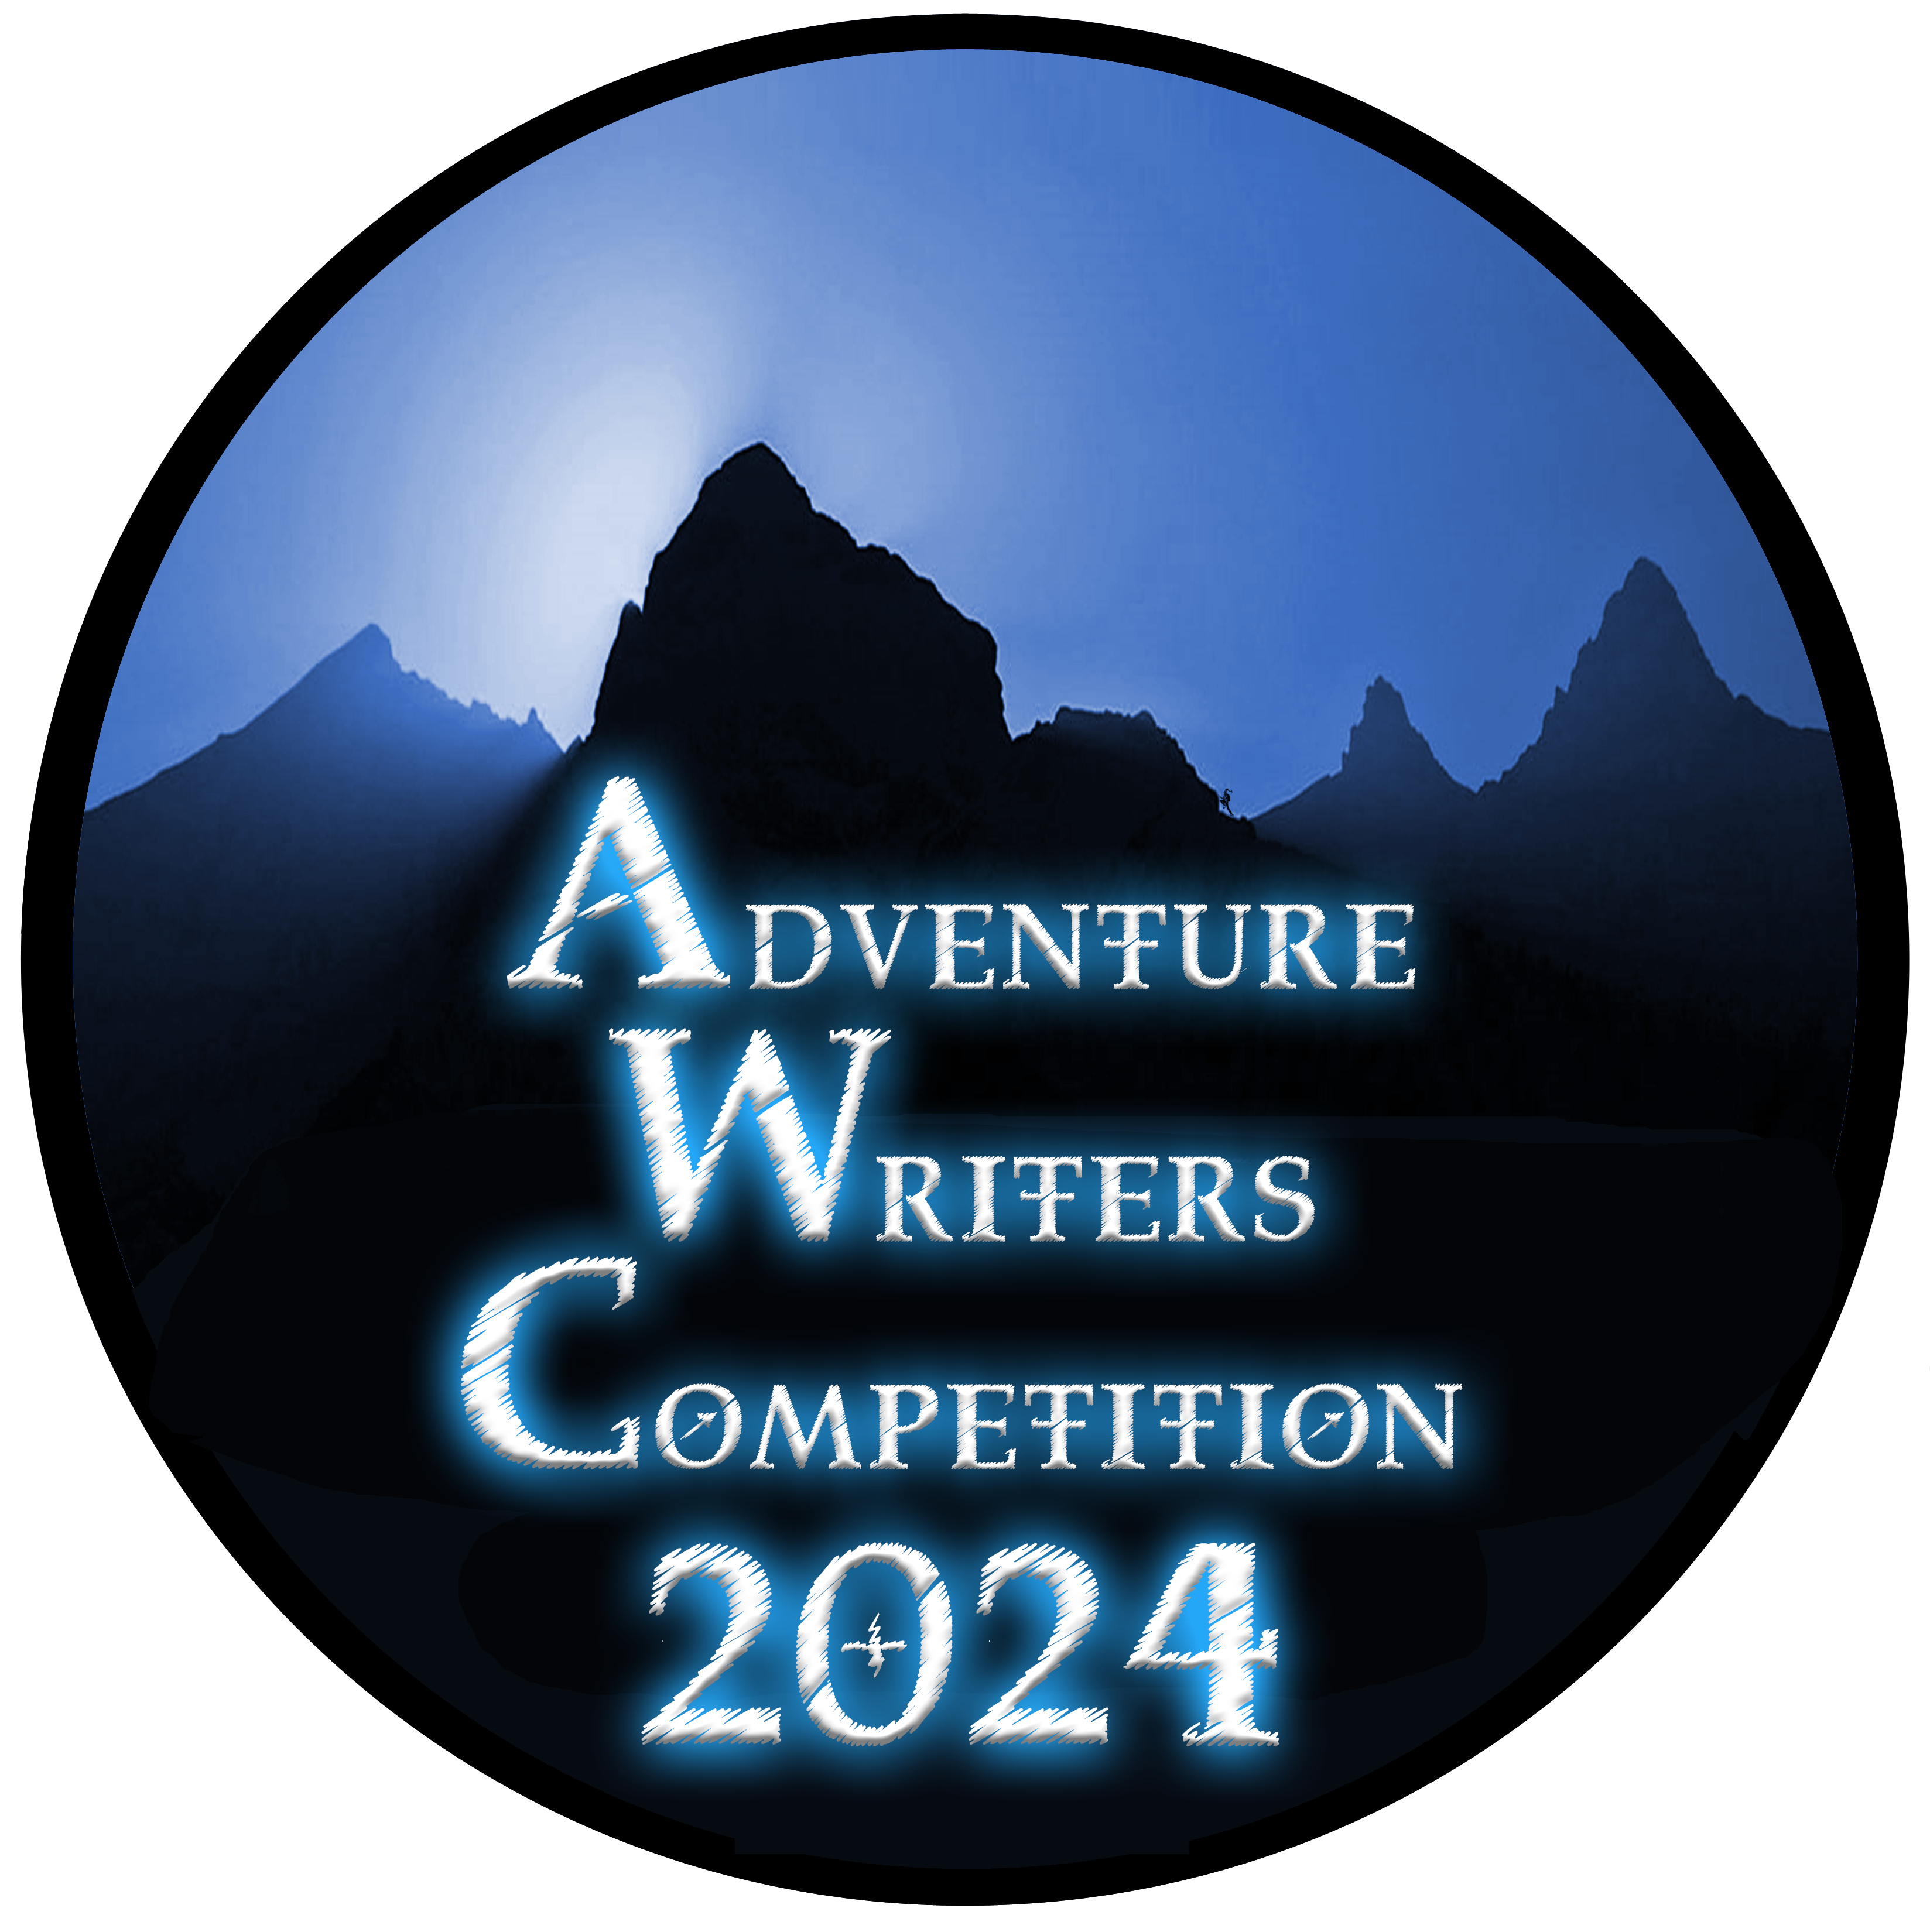 The Adventure Writers Competition